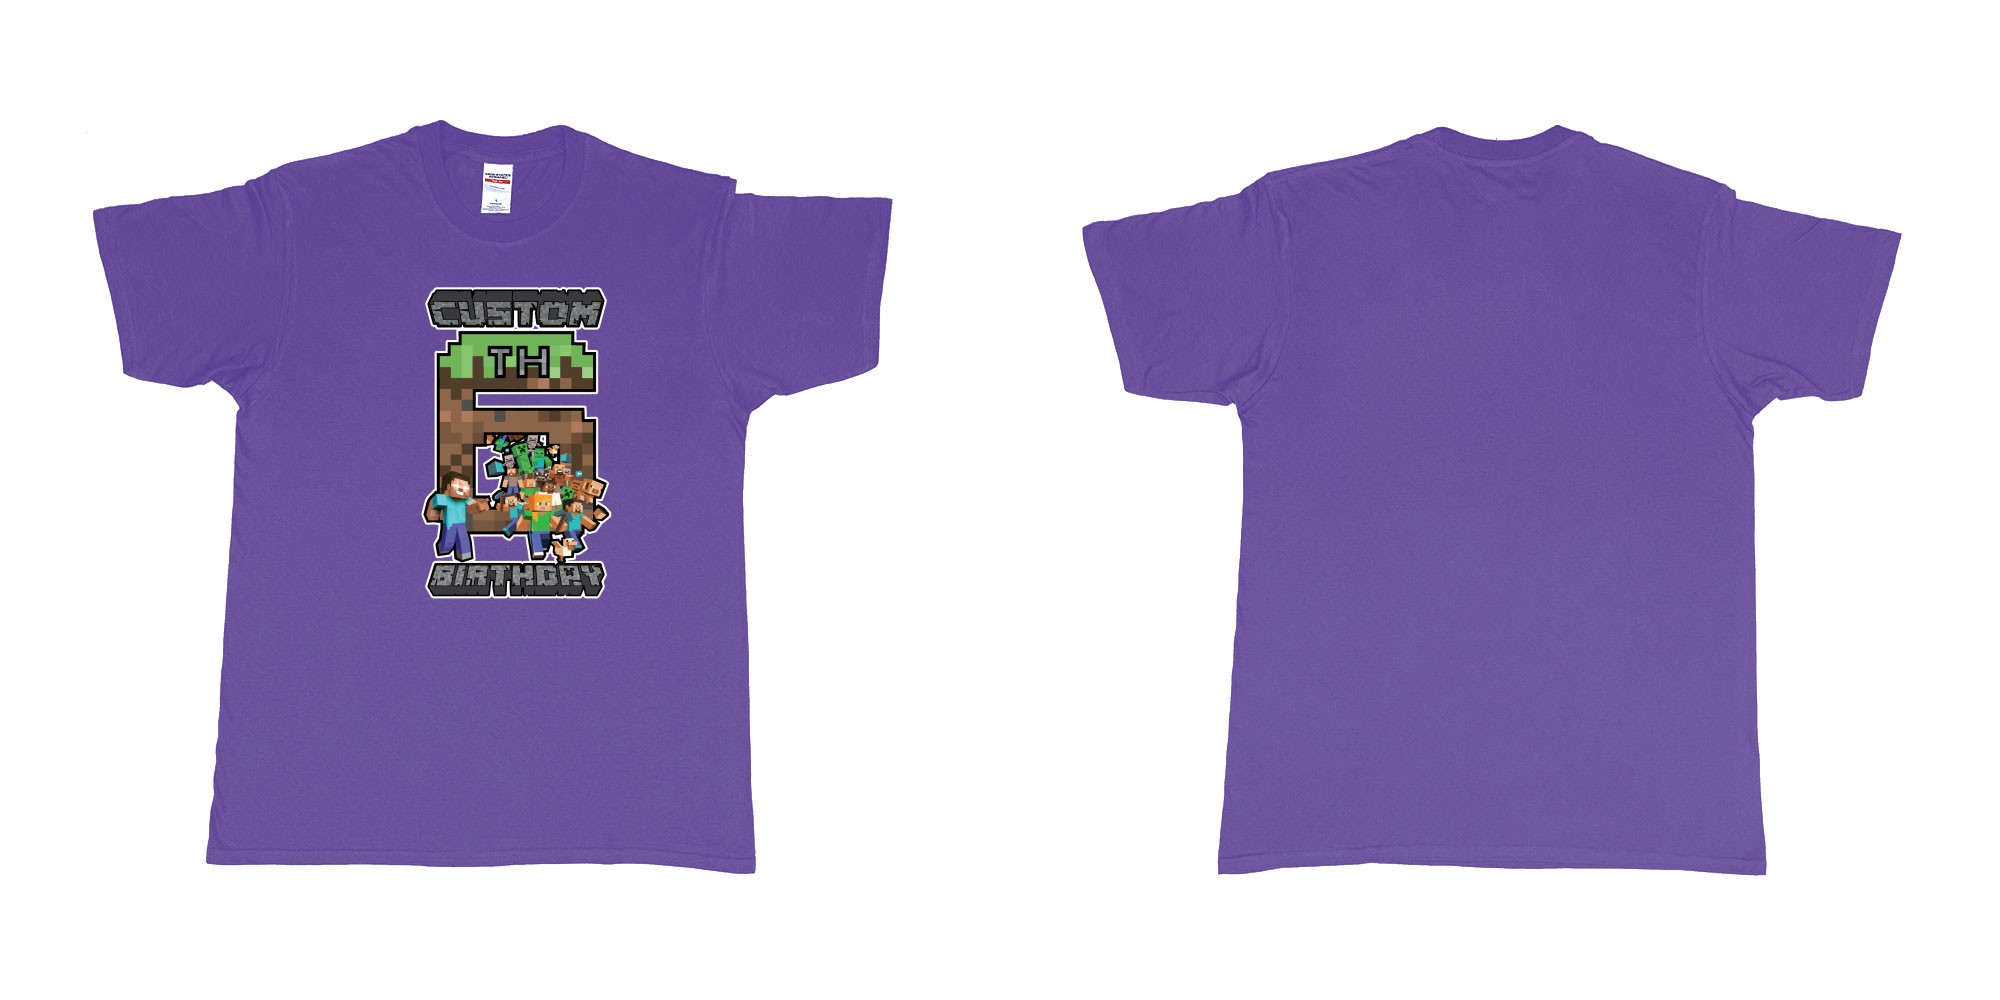 Custom tshirt design minecraft 6th birthday custom name year in fabric color purple choice your own text made in Bali by The Pirate Way